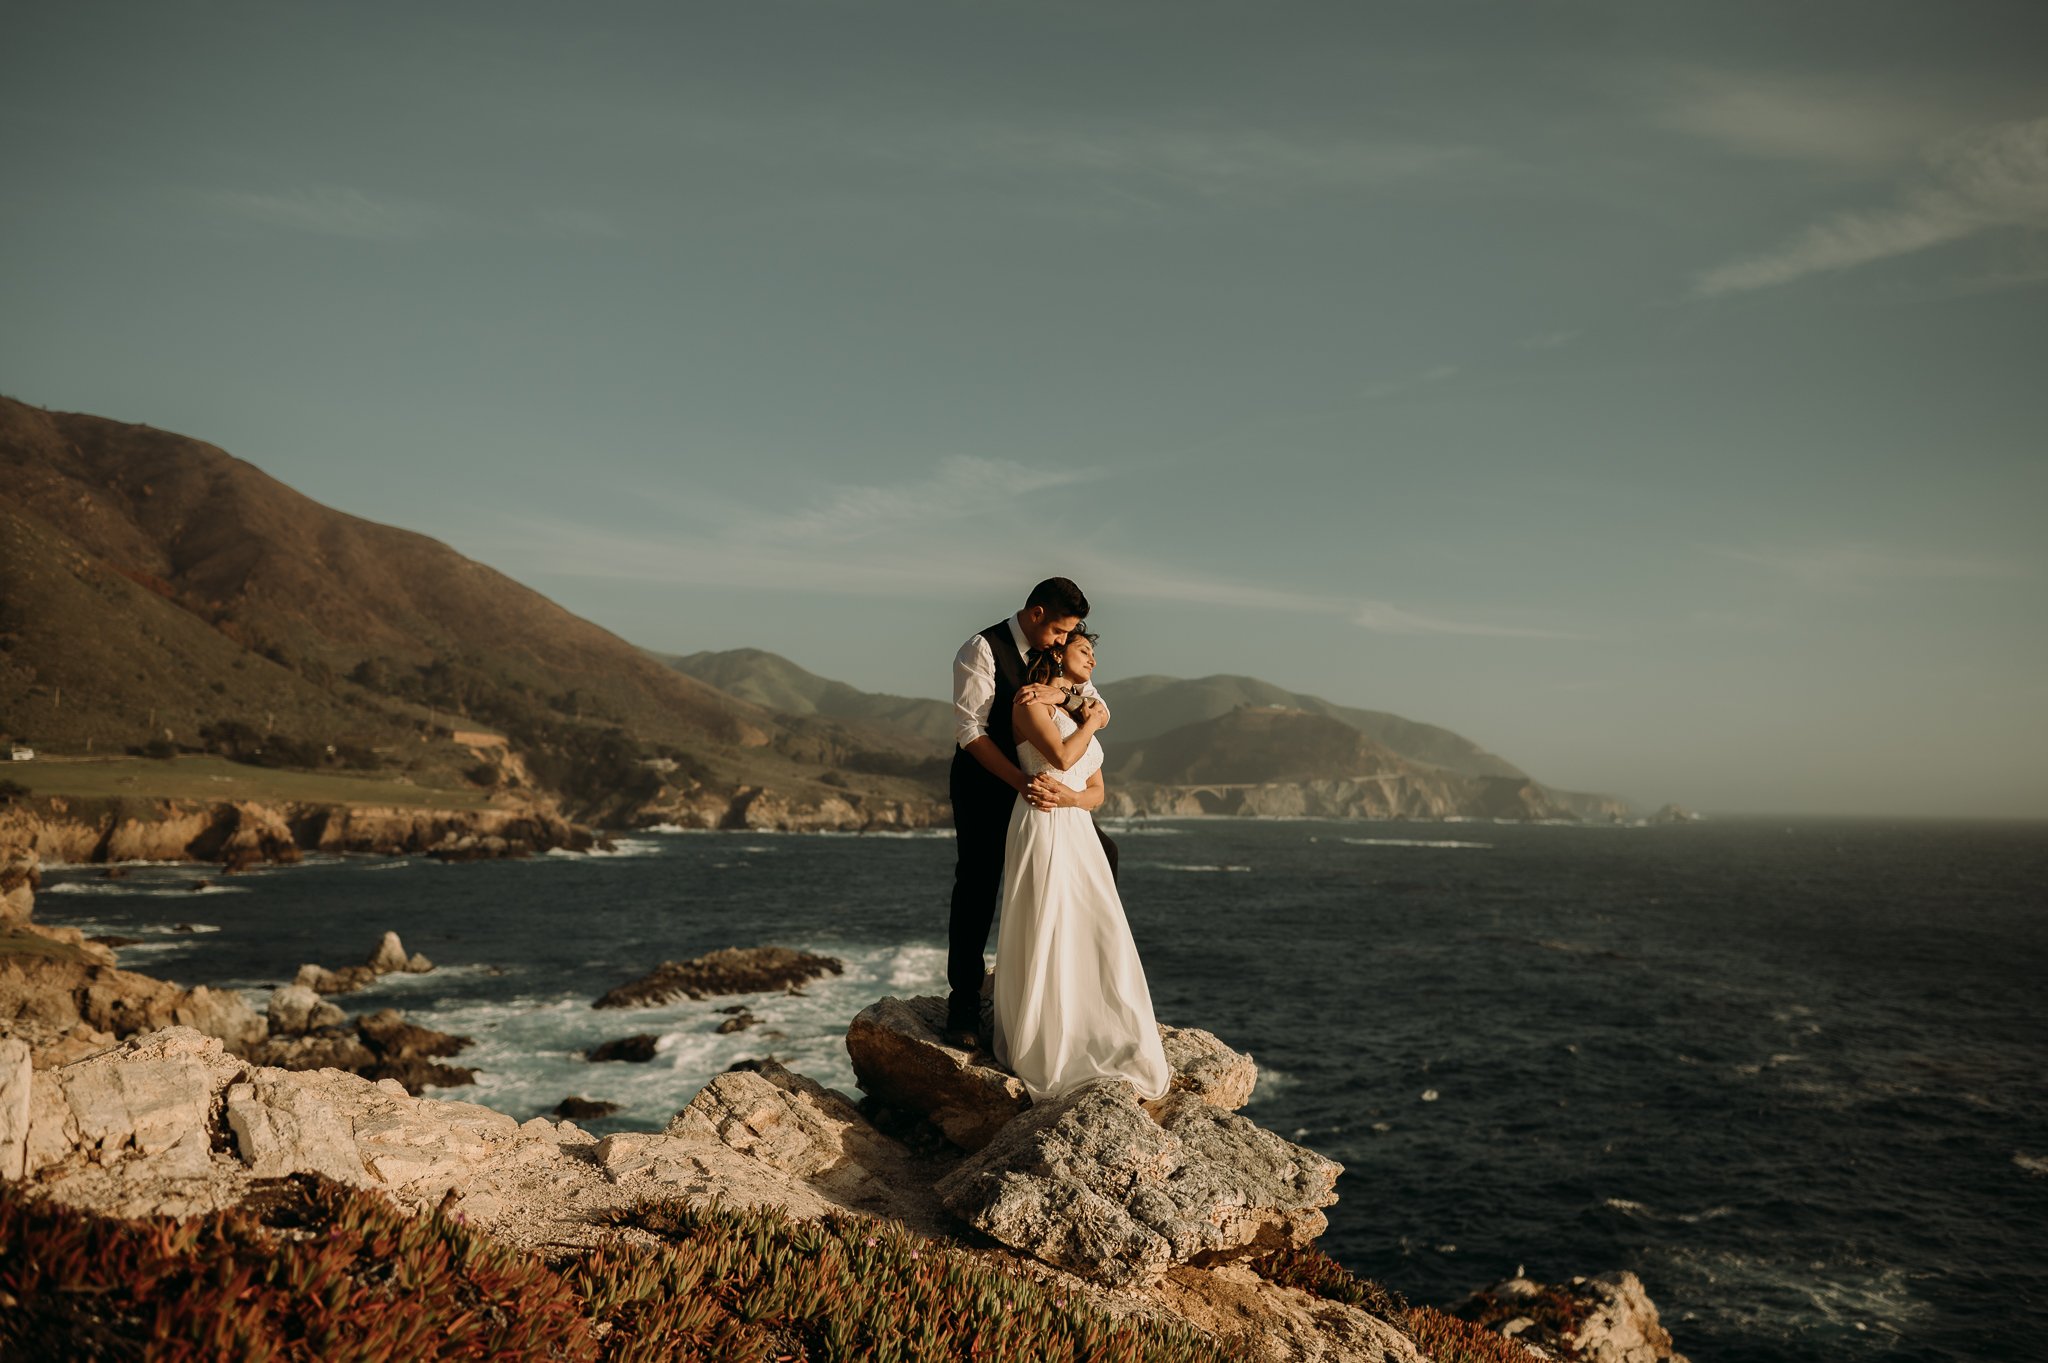 Couple posing on cliffs overlooking the Pacific Ocean Big Sur California